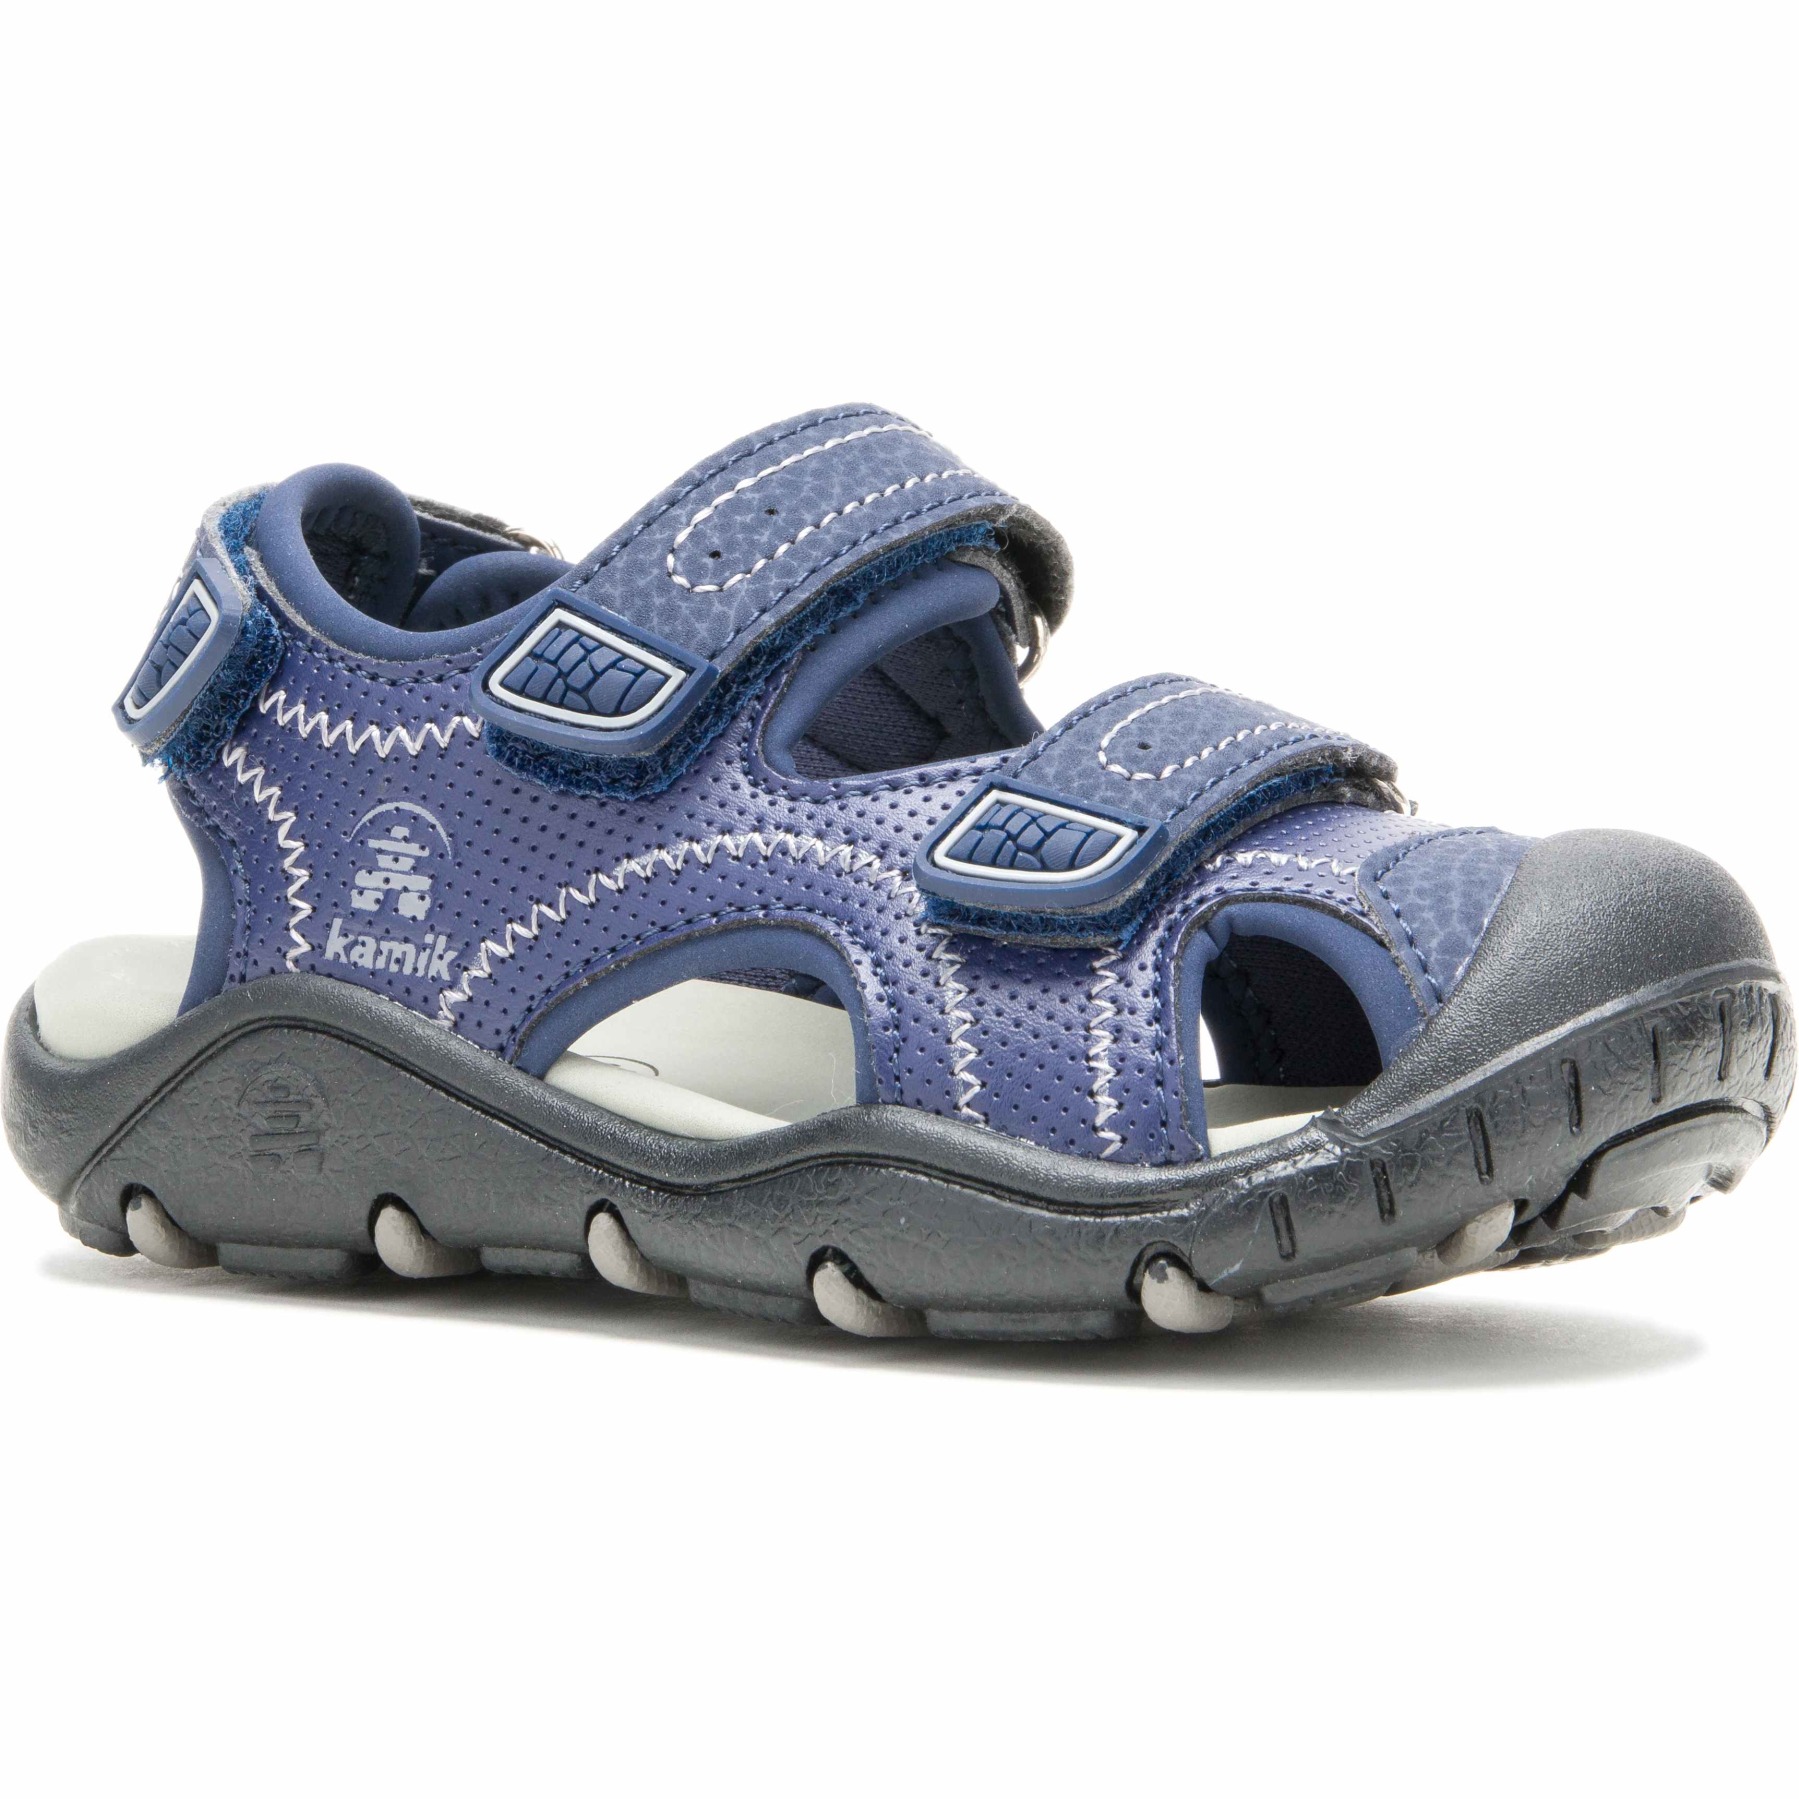 Picture of Kamik Seaturtle2 Kids Sandals - Navy (Size 22-27)